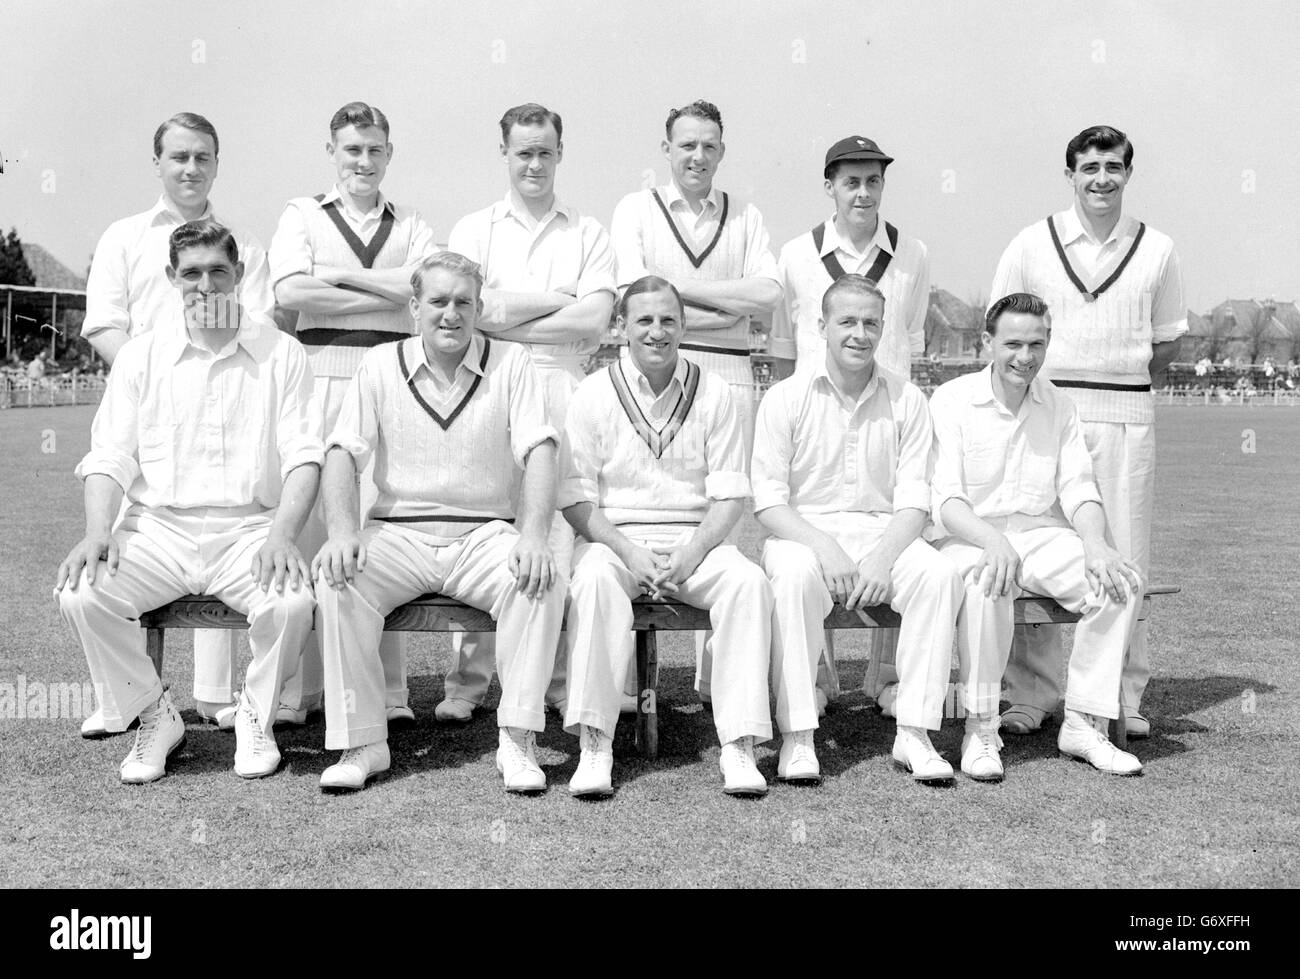 Players of the Yorkshire cricket team. Left to right: Back Row, Lister, Illingworth, Close, Appleyard, Booth, Trueman. Front Row, Wilson, Wardle, Hutton, Watson and Lowson. Stock Photo